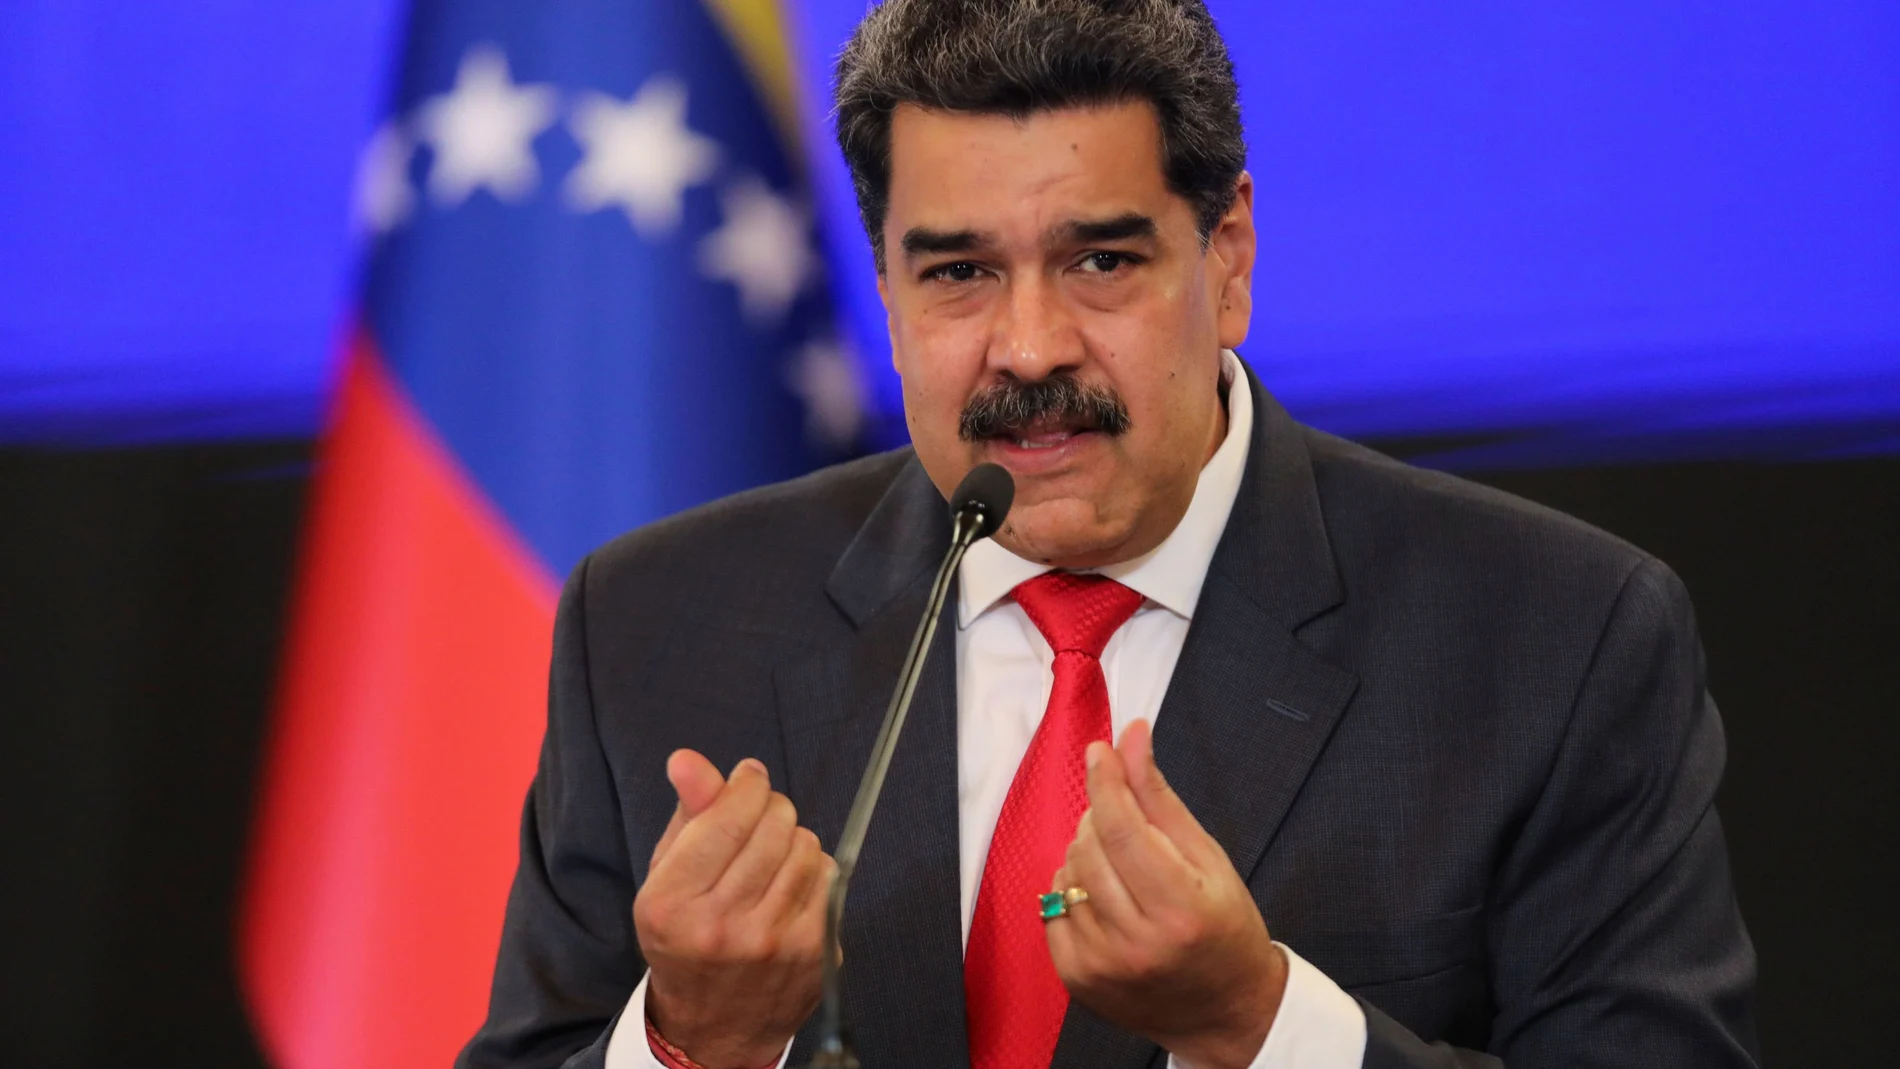 FILE PHOTO: Venezuelan President Nicolas Maduro gestures as he speaks during a press conference following the ruling Socialist Party's victory in legislative elections that were boycotted by the opposition in Caracas, Venezuela December 8, 2020. REUTERS/Manaure Quintero/File Photo